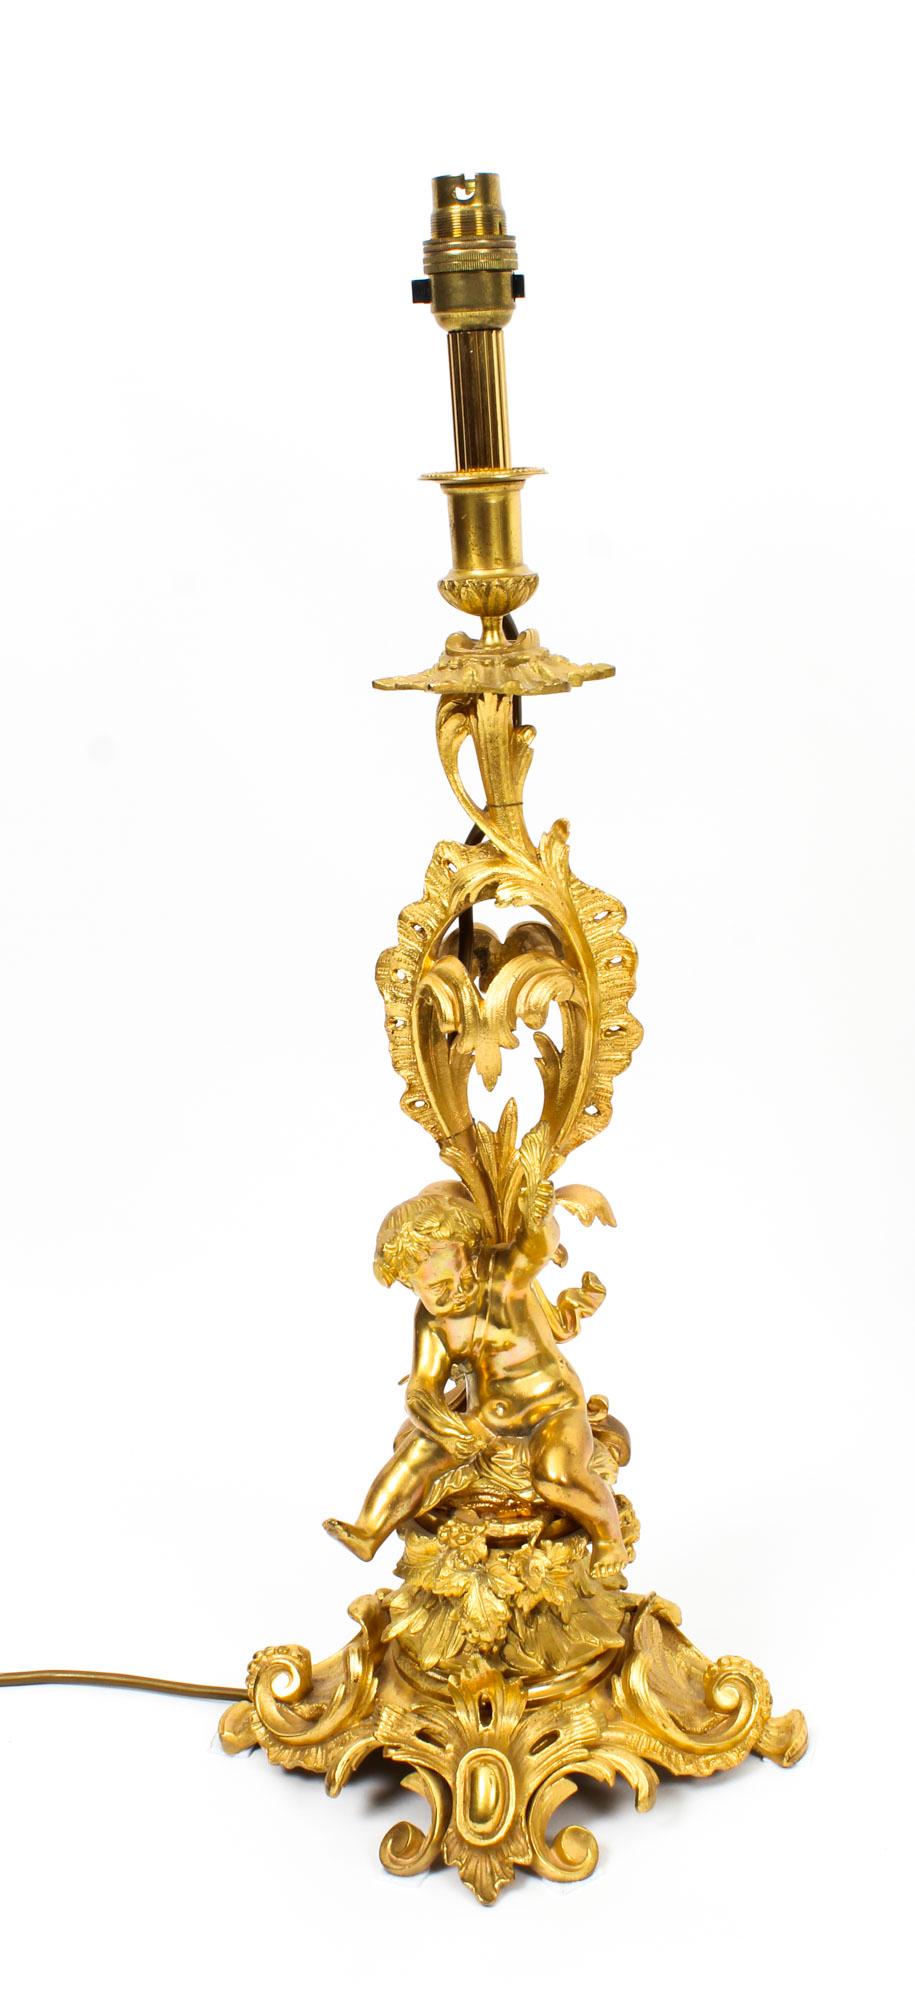 A large and magnificent antique pair of French gilt bronze candelabra, circa 1870 in dater, later converted to table lamps.

They are each superbly decorated with foliate scrolls and stunning gilt bronze playful seated cherubs that are draped with